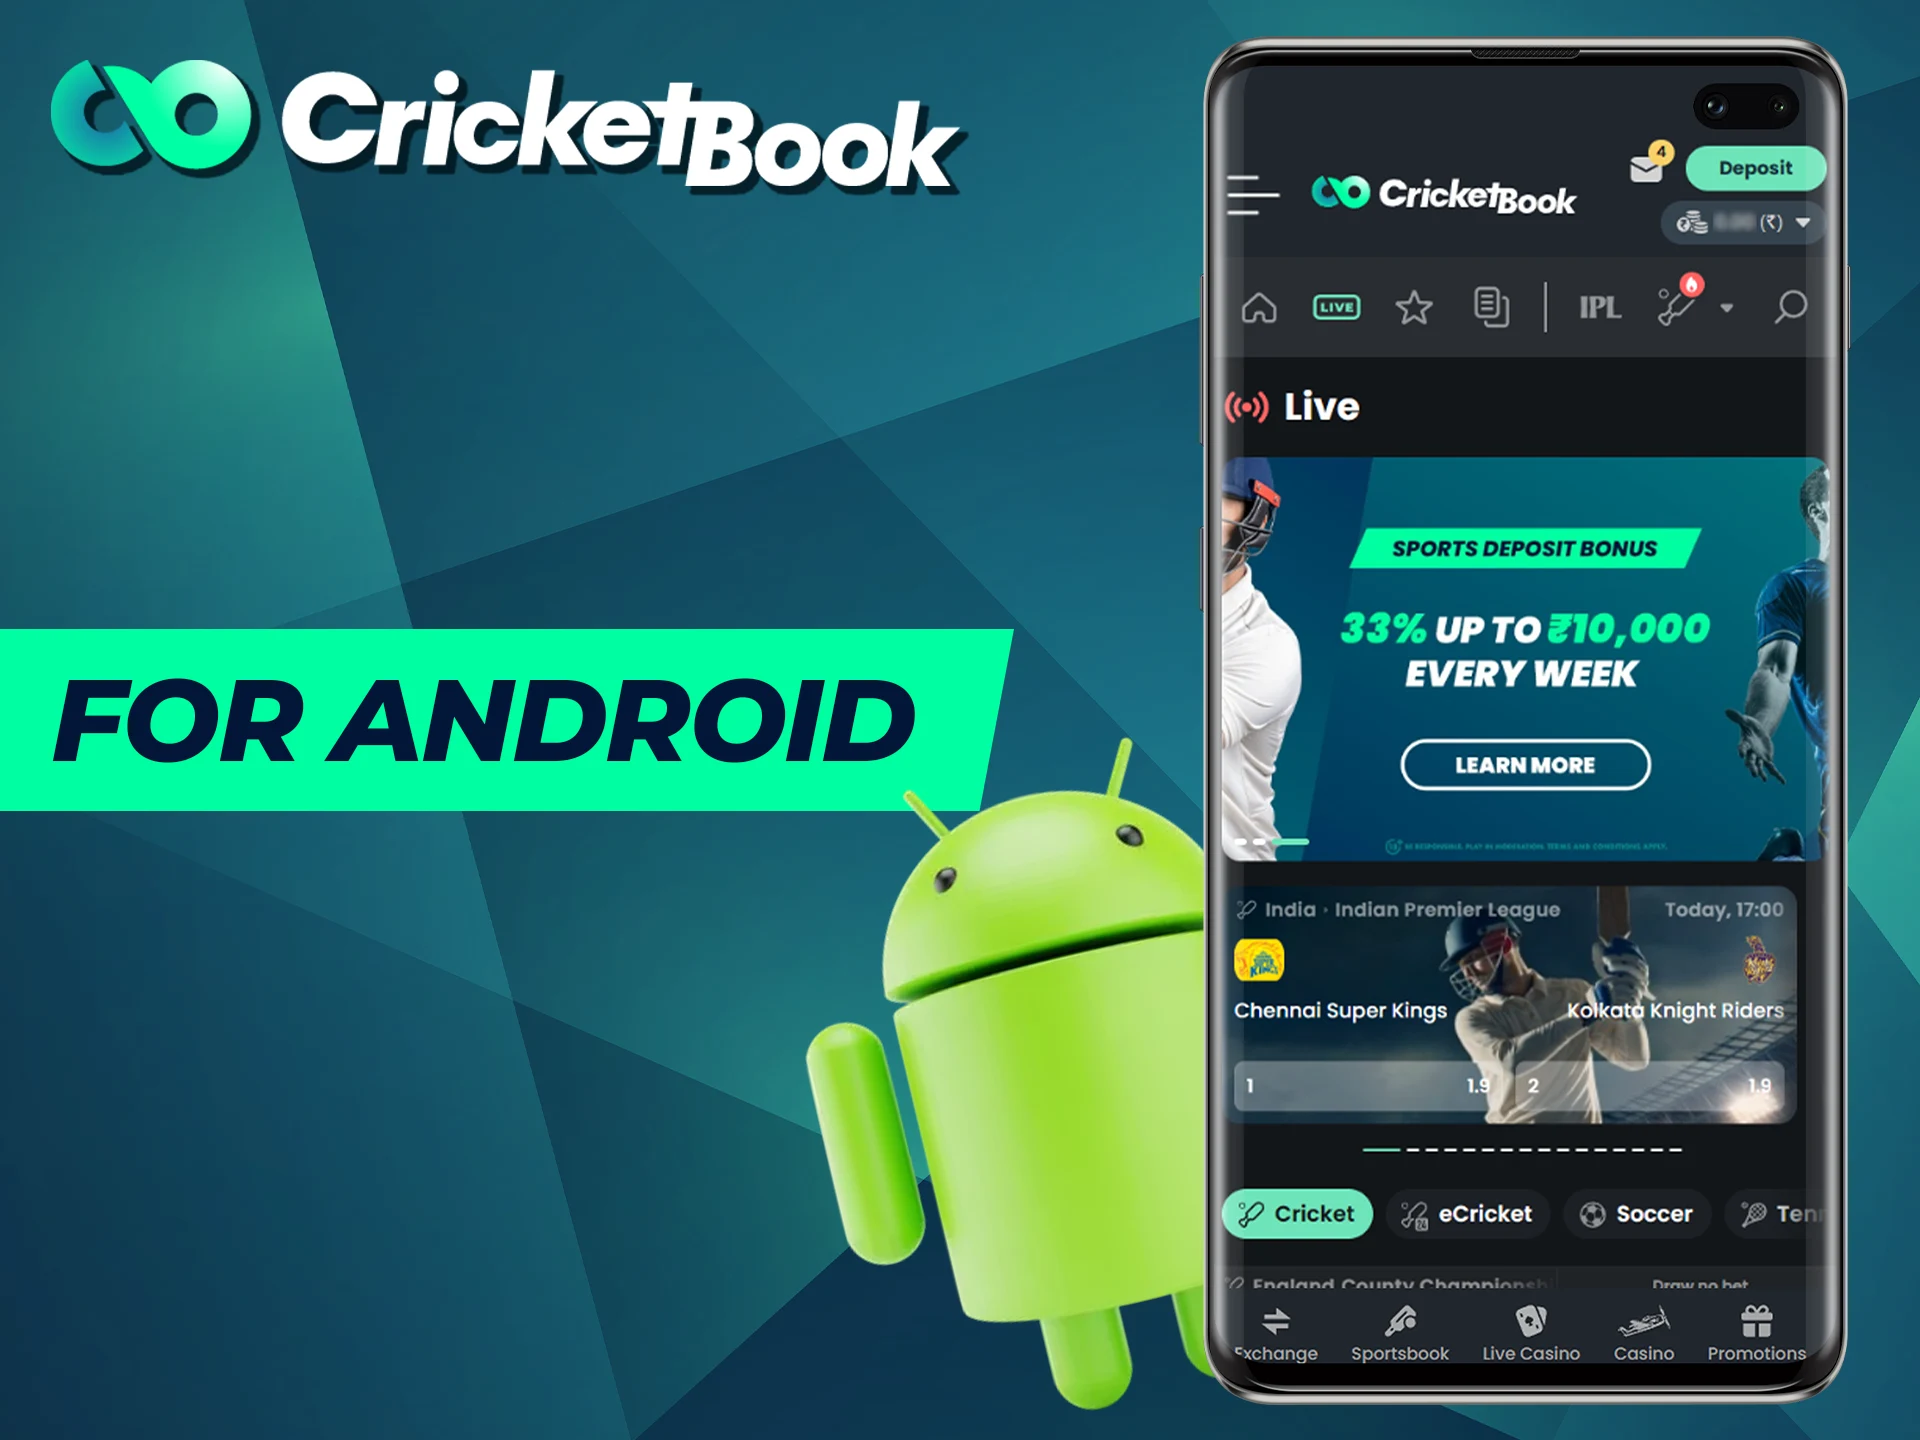 The CricketBook app runs on Android devices.